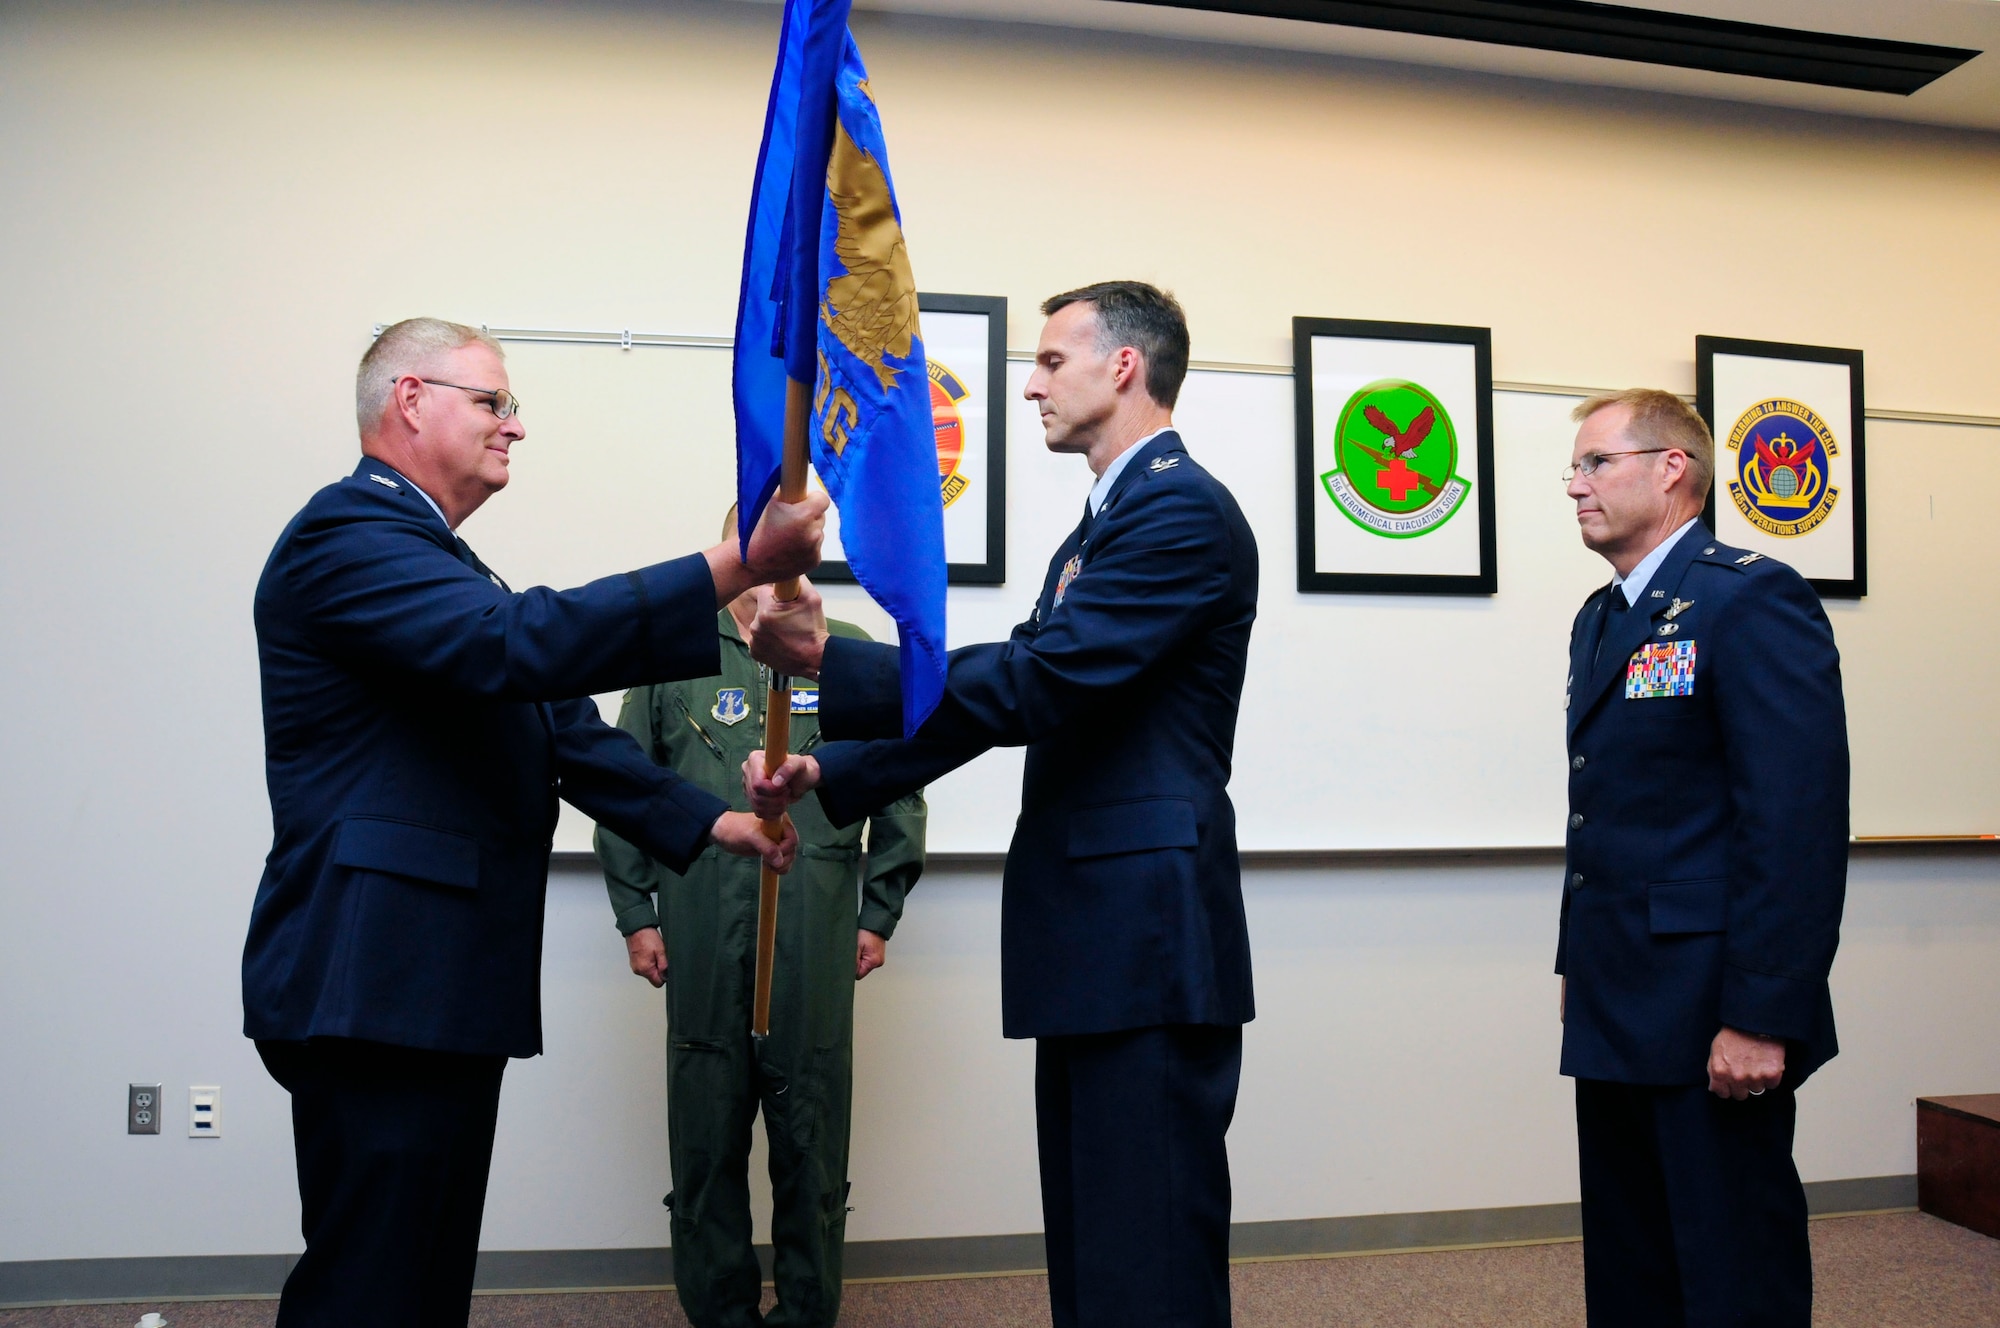 U.S. Air Force Col. Joseph H. Stepp IV, assumes command of the 145th Operations Group as he accepts the 145th OG guidon from Col. Marshall C. Collins, commander, 145th Airlift Wing, during a change of command ceremony held at the North Carolina Air National Guard Base, Charlotte Douglas International Airport; June 6, 2015. (U.S. Air National Guard photo by Master Sgt. Patricia F. Moran, 145th Public Affairs/Released)